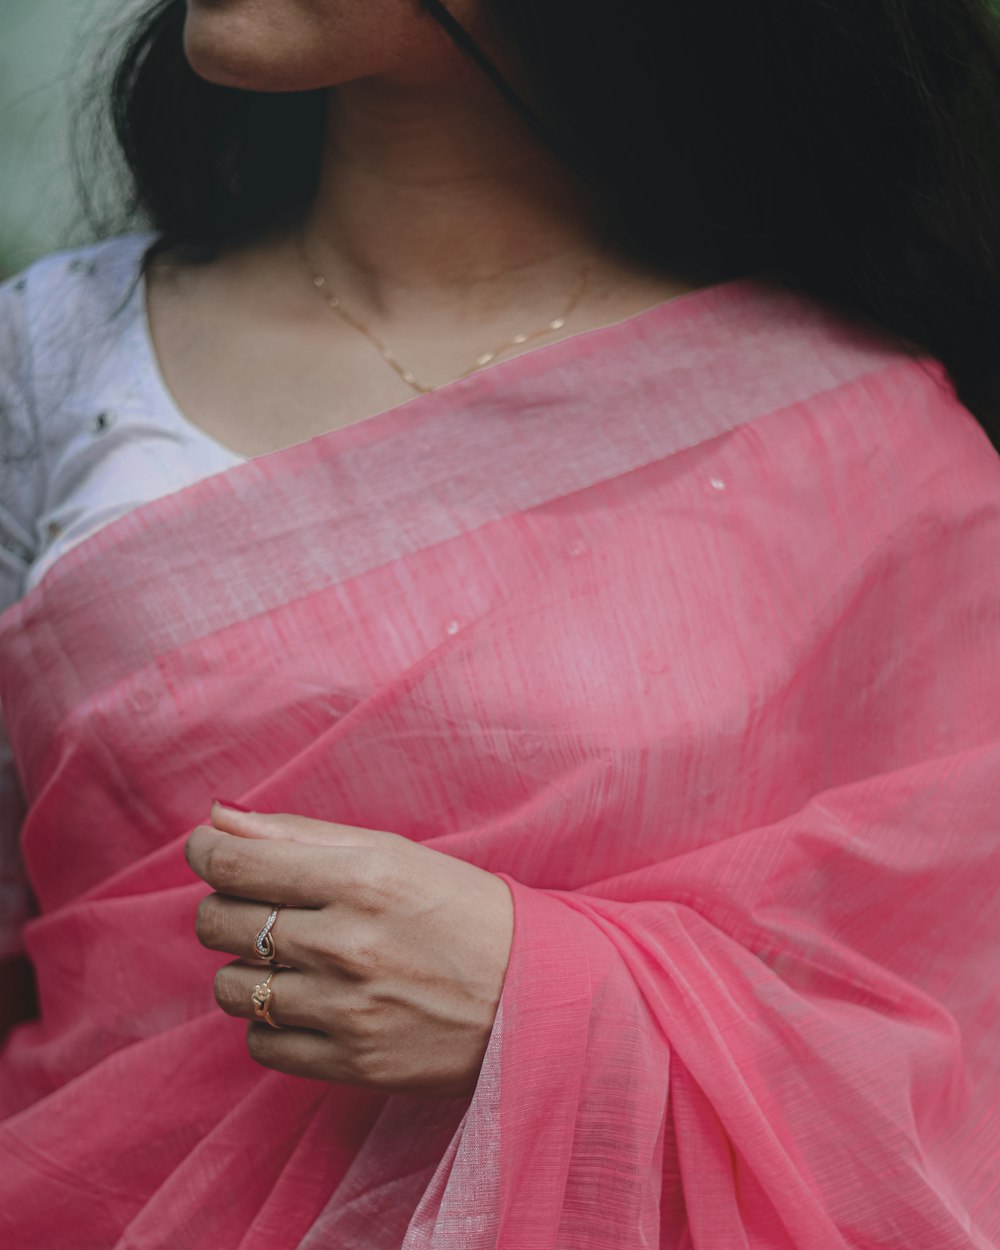 a woman in a pink sari with a ring on her finger